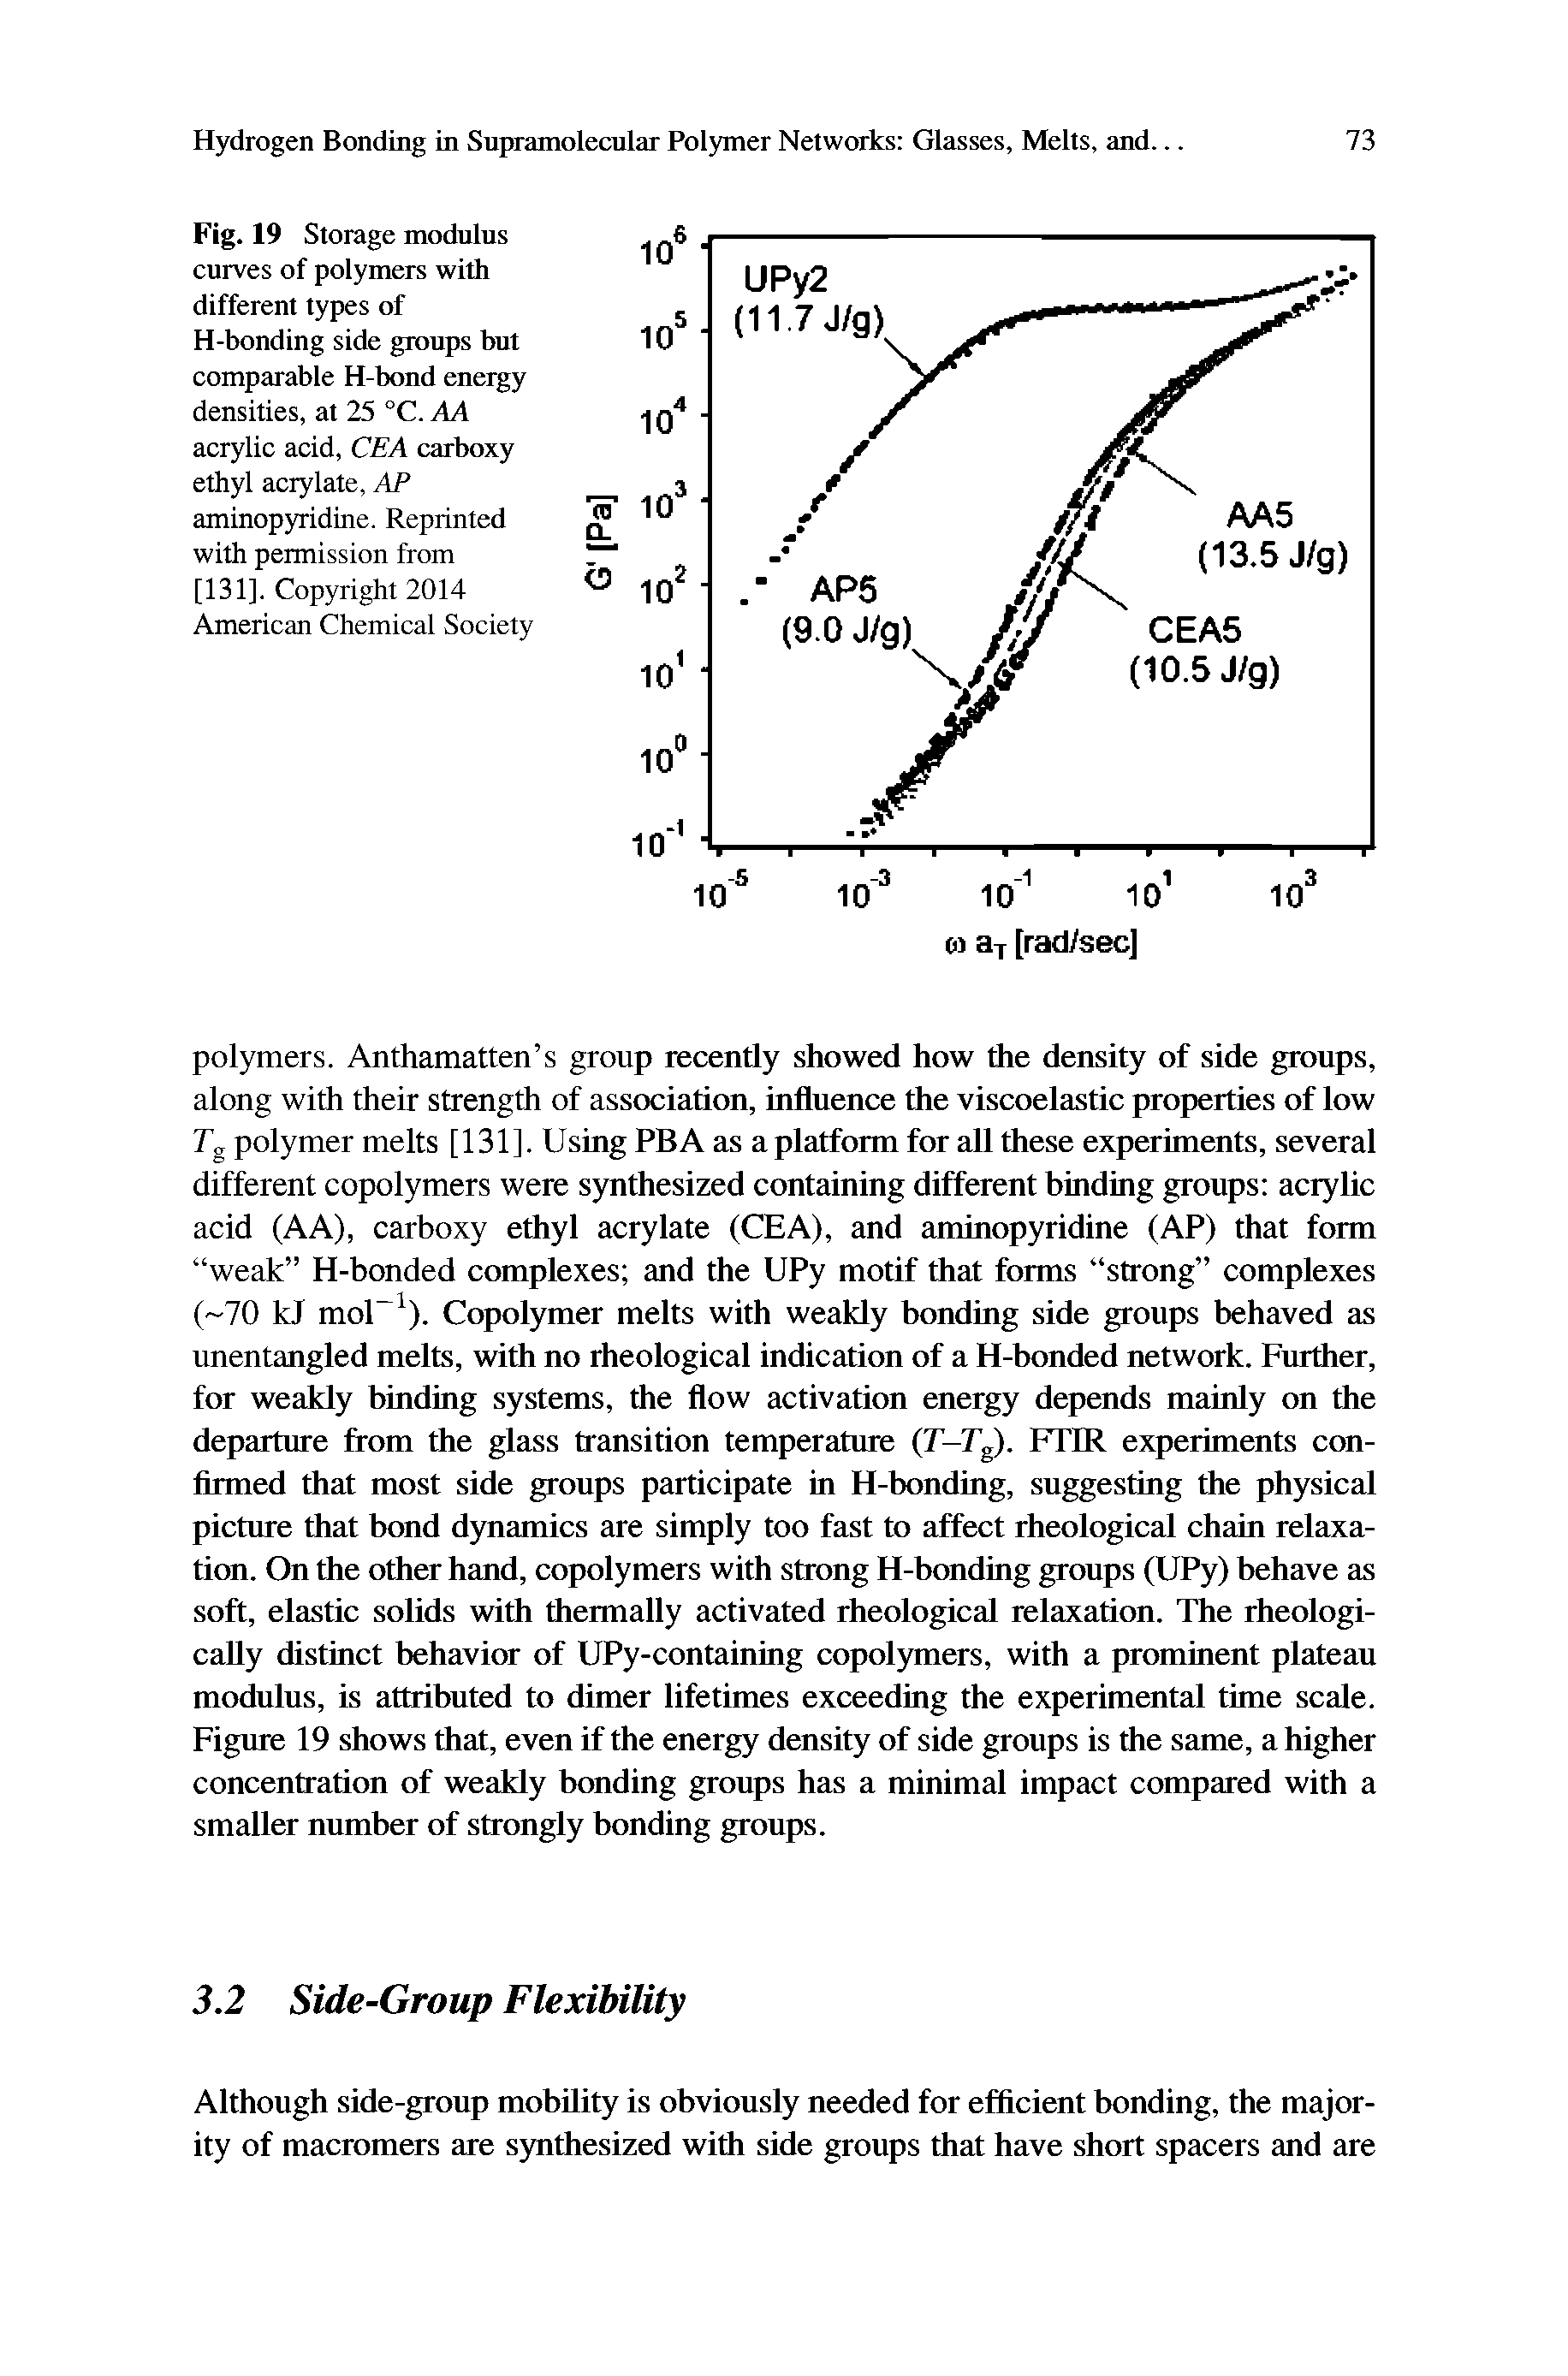 Fig. 19 Storage modulus curves of polymers with different types of H-bonding side groups but comparable H-bond eneigy densities, at 25 °C. AA acrylic acid, CEA carboxy ethyl acrylate, AlP aminopyridine. Reprinted with permission from [131], Copyright 2014 American Chemical Society...